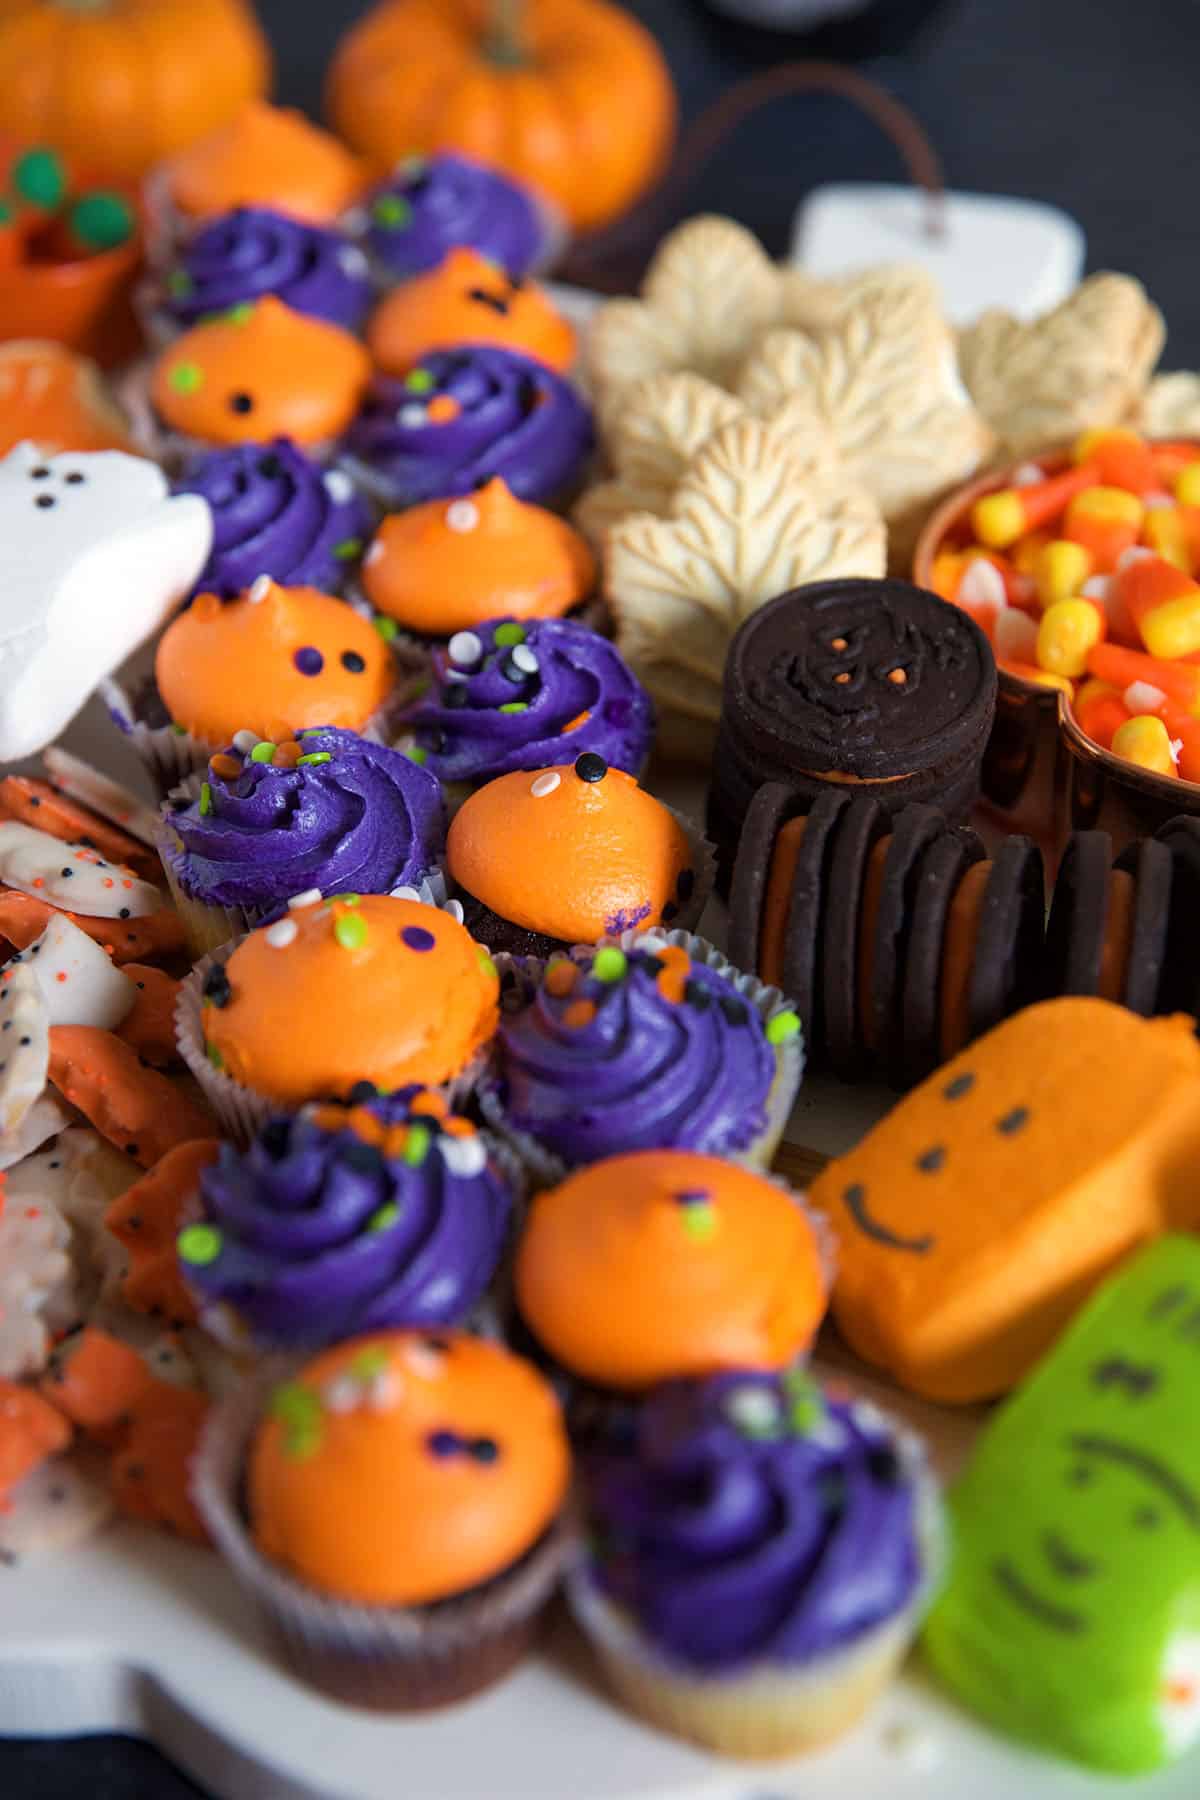 Purple and orange frosted cupcakes are lined up next to other sweet treats on a white pumpkin serving tray.